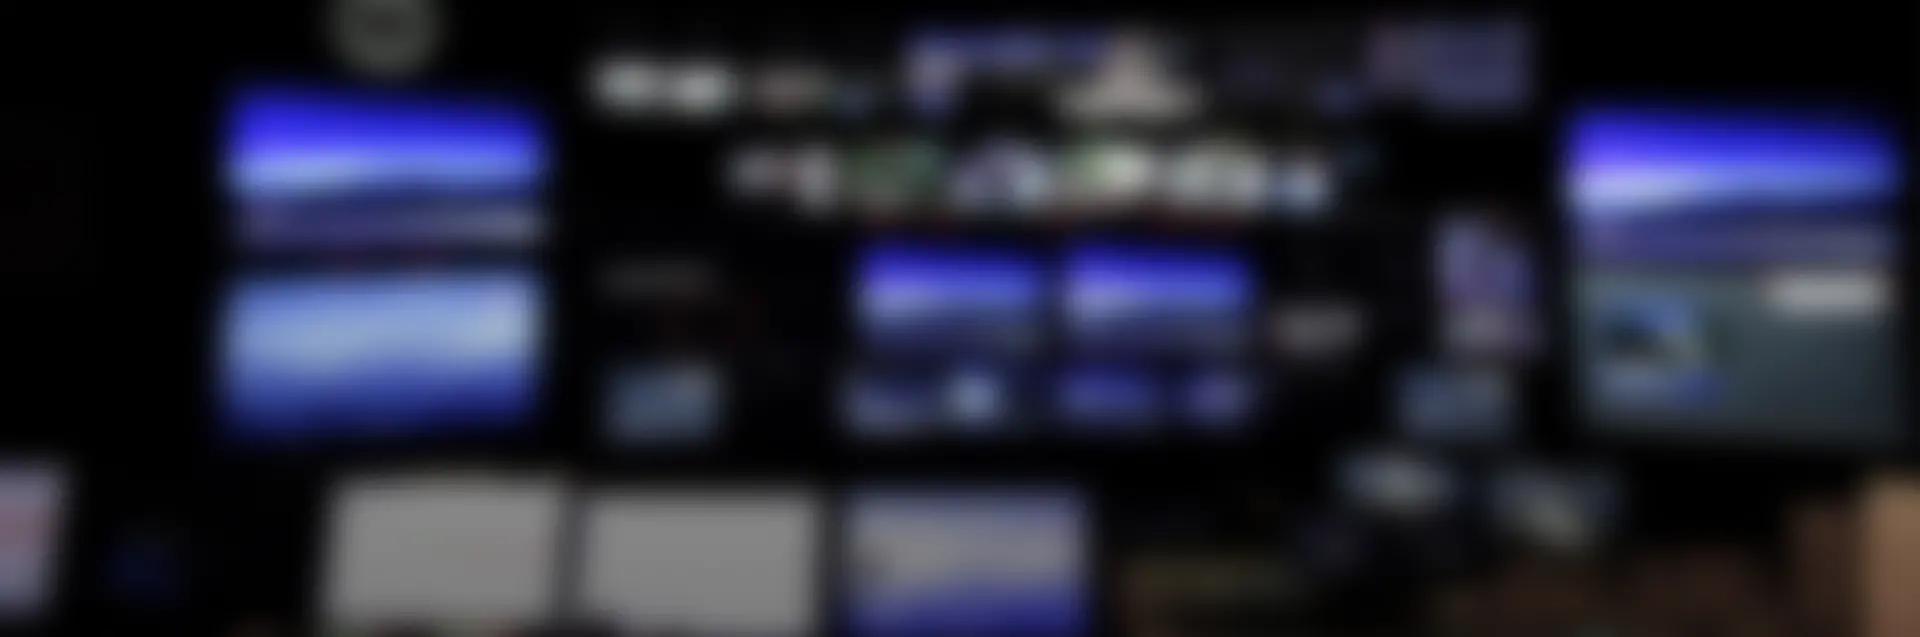 Blurry, background image of a television newsroom.